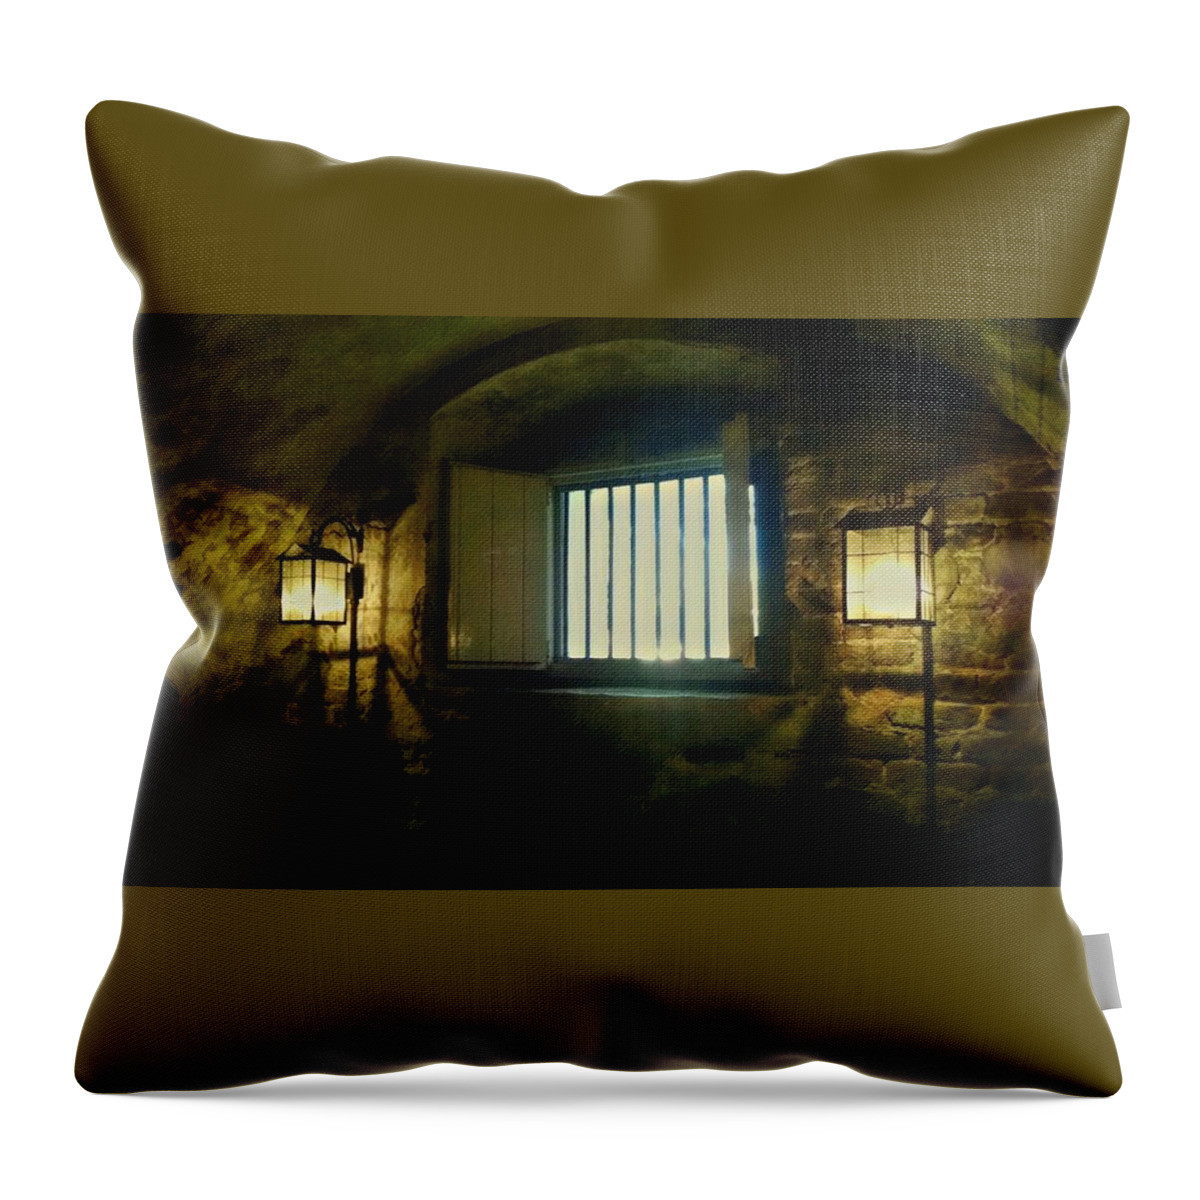 Dungeon Throw Pillow featuring the photograph Downtown Dungeon by Sherry Kuhlkin